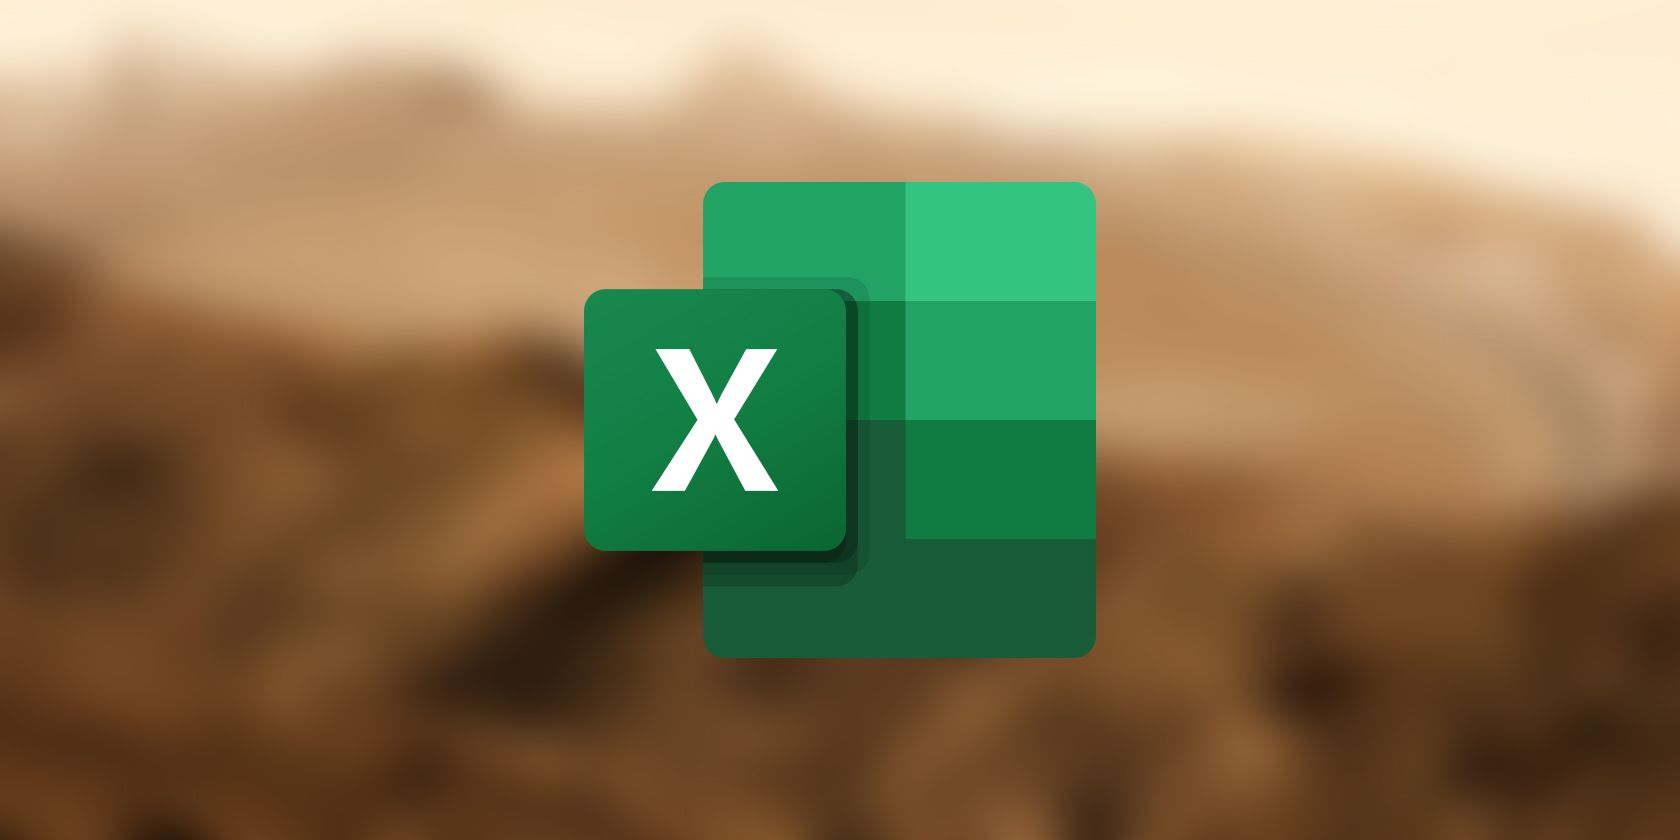 How to Sort Data Alphabetically in Excel